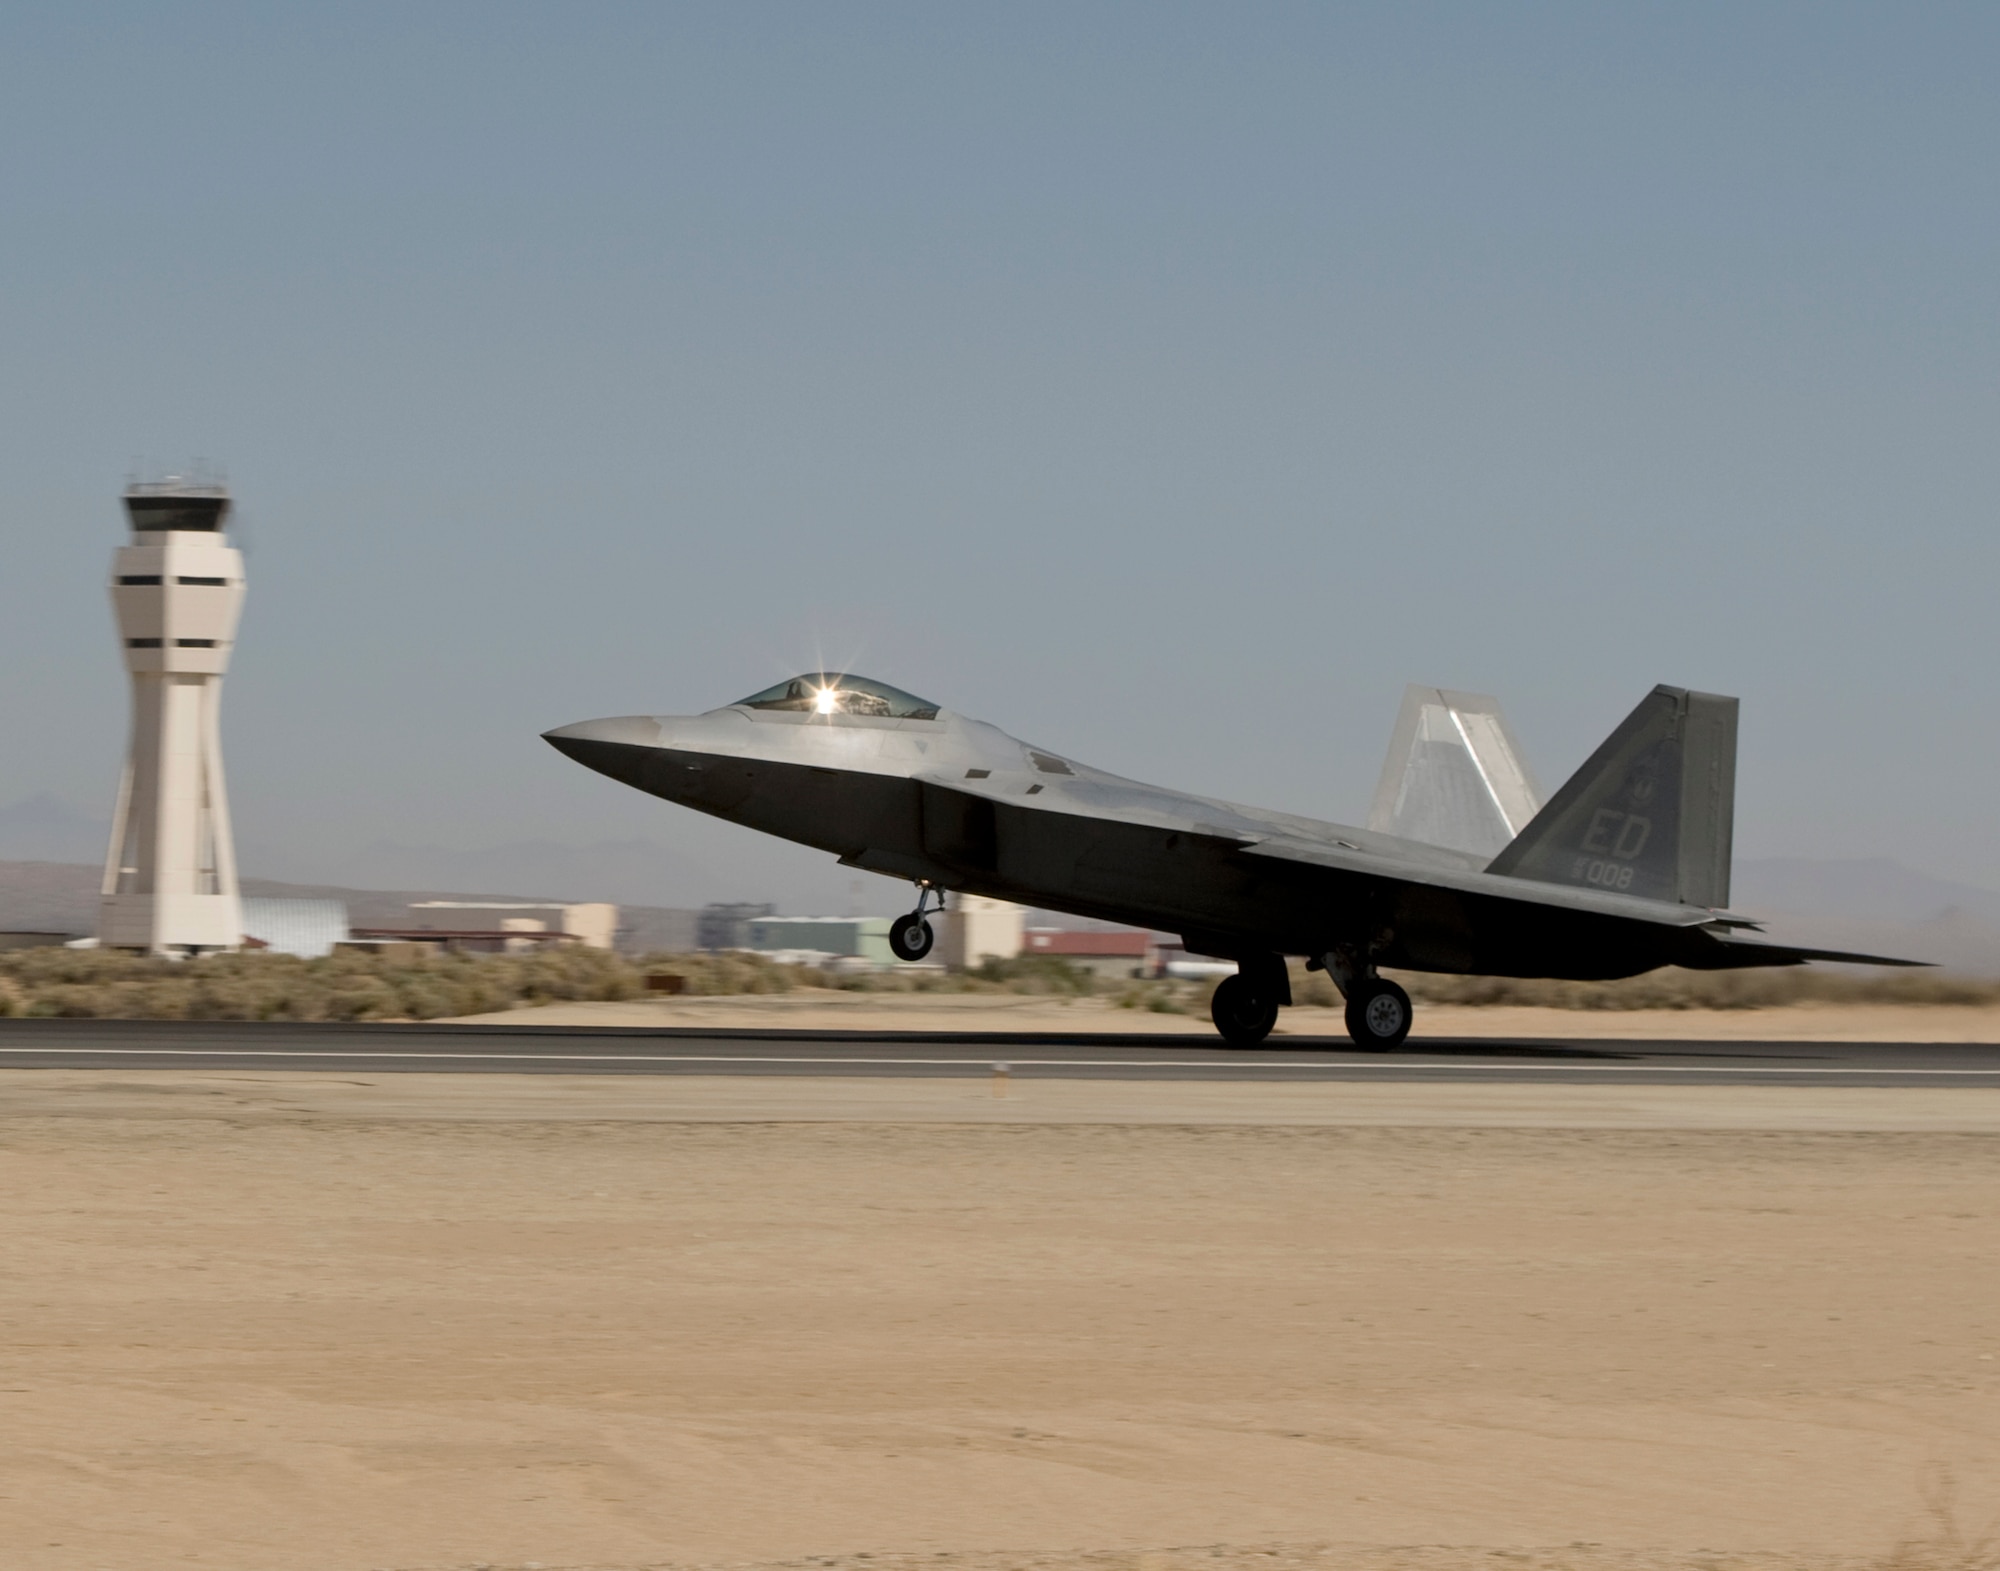 An F-22 Raptor takes off from Edwards Air Force Base, Calif., Aug. 28 to take part in an aerial refueling test using an alternative jet engine fuel -- a first for an Air Force aircraft. The fuel is a 50/50 mix of JP-8 jet fuel and a natural gas-based fuel.  (Lockheed Martin photo)